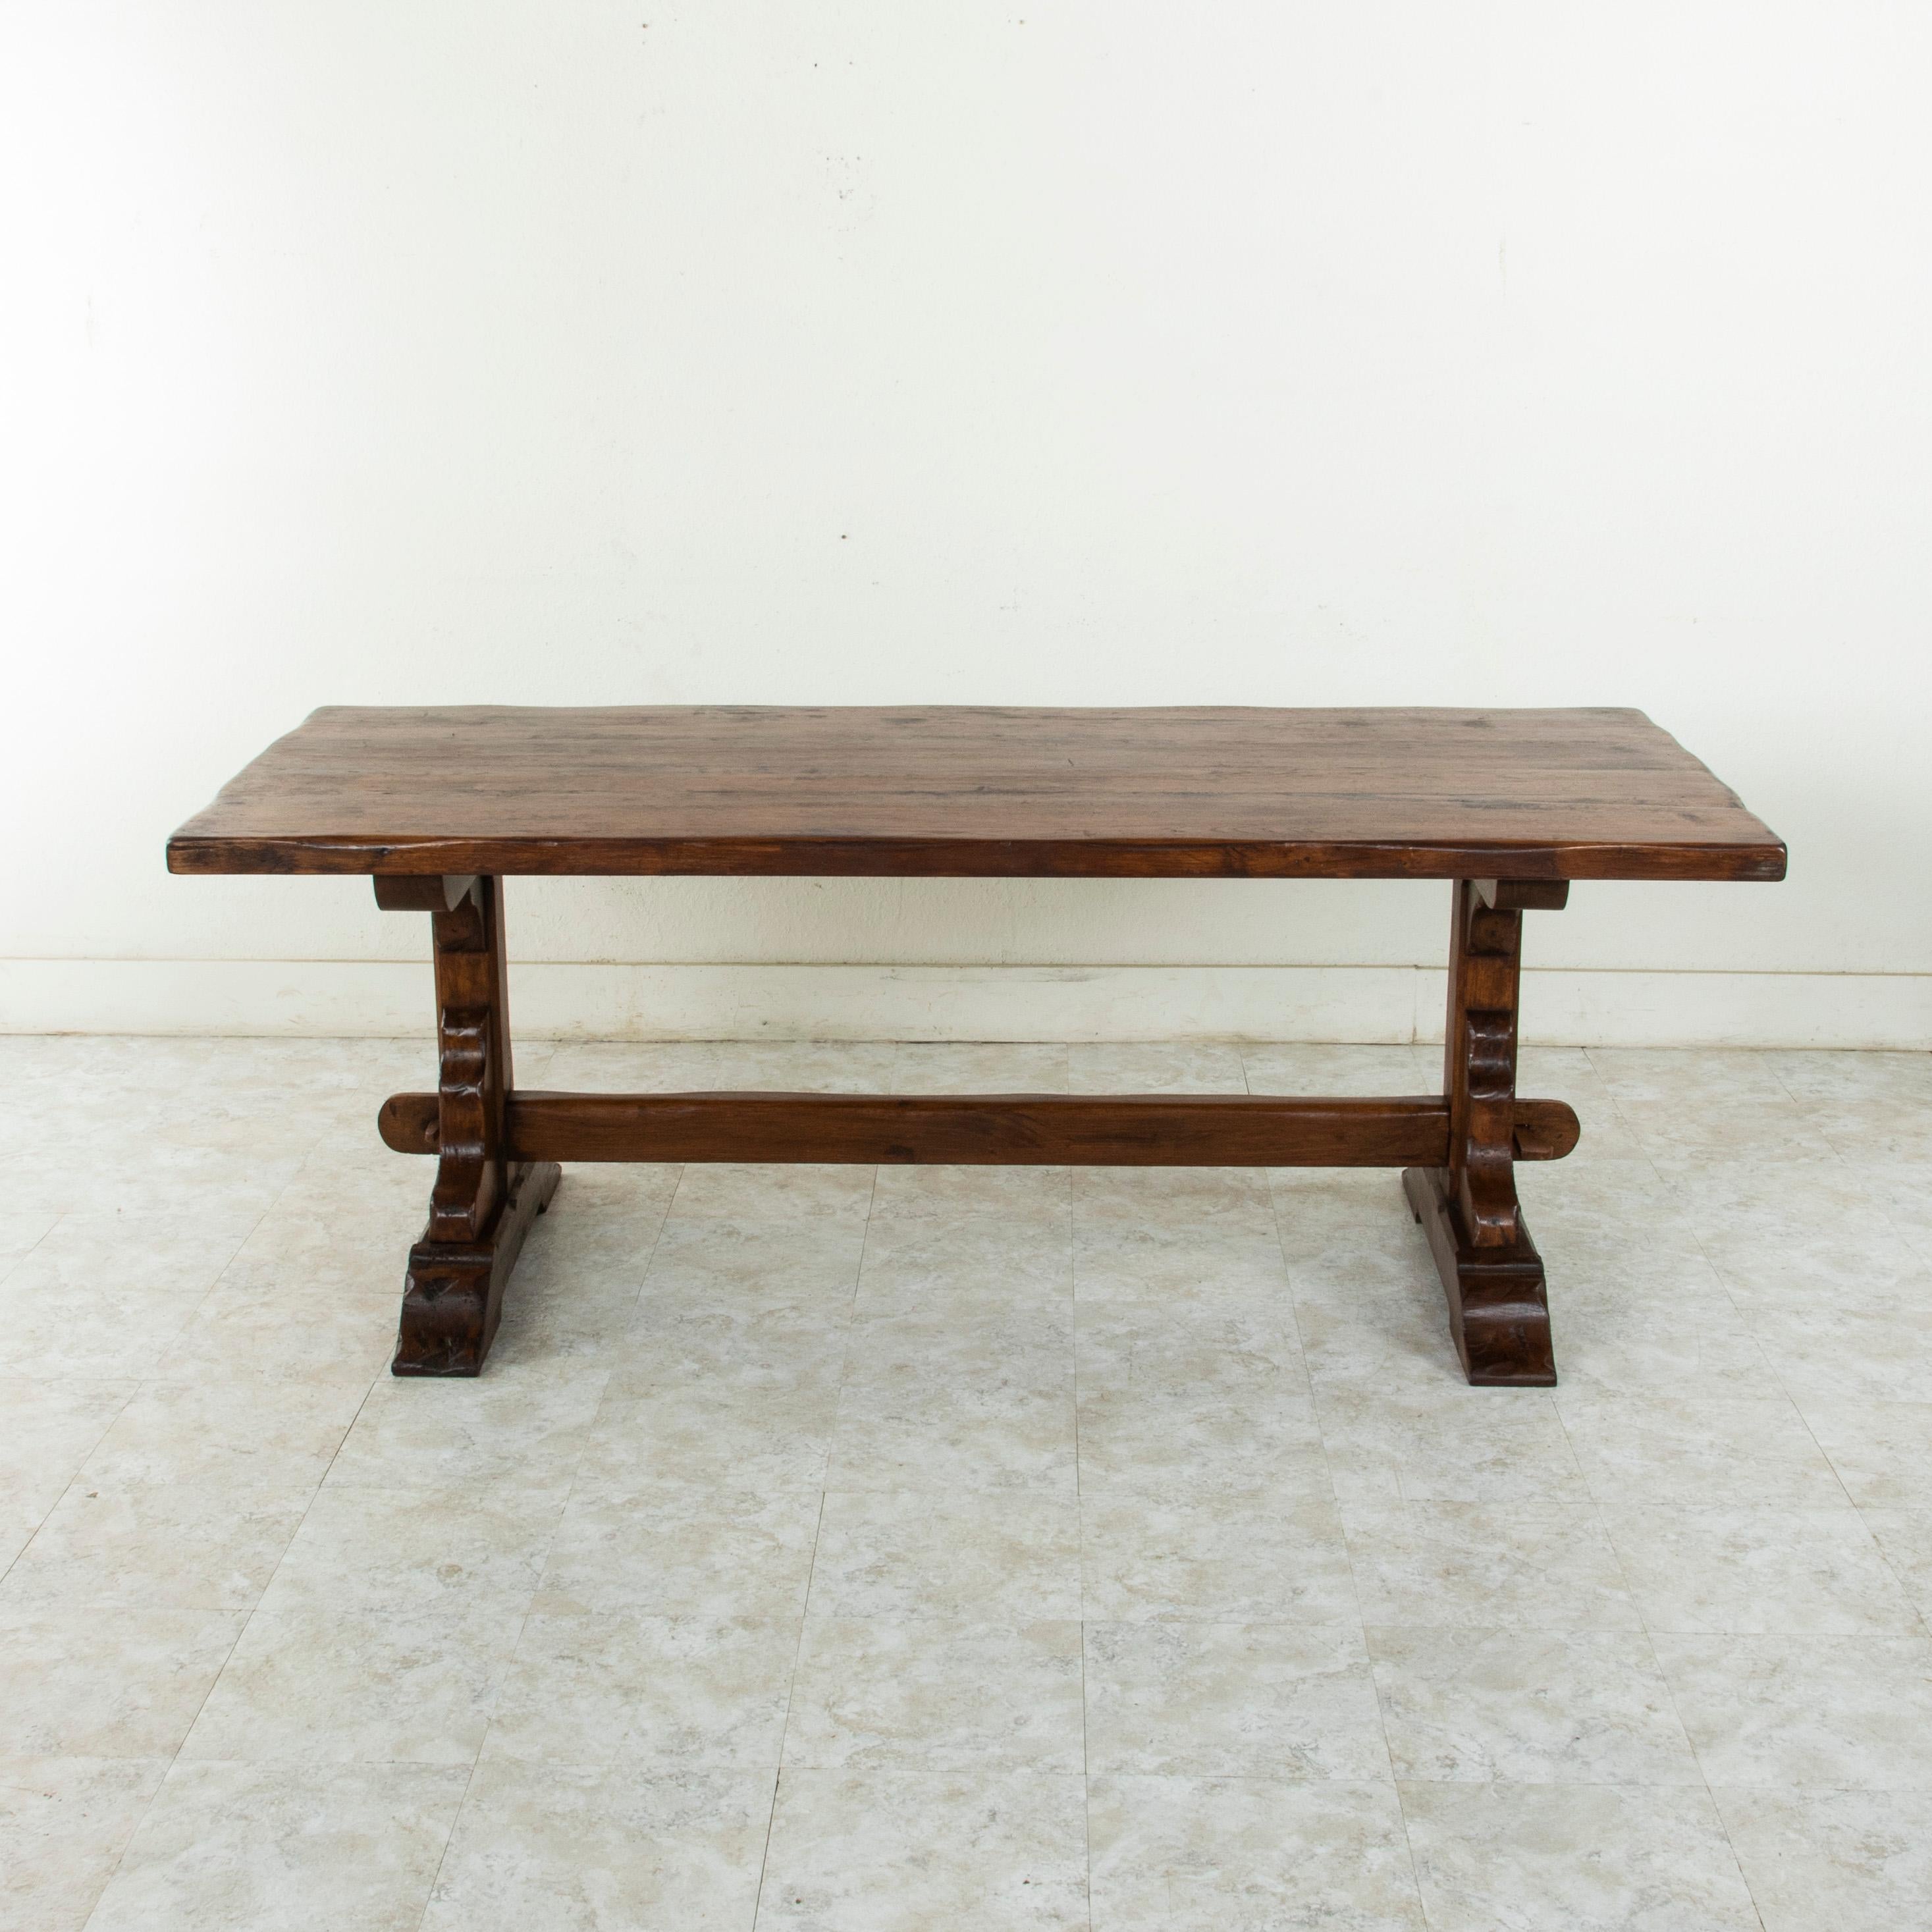 This circa 1930s monastery table or dining table is from the region of Normandy, France. Made of solid oak, this piece features a two inch thick top. Resting on a sturdy trestle base constructed using mortise and Tenon joinery and secured by oak